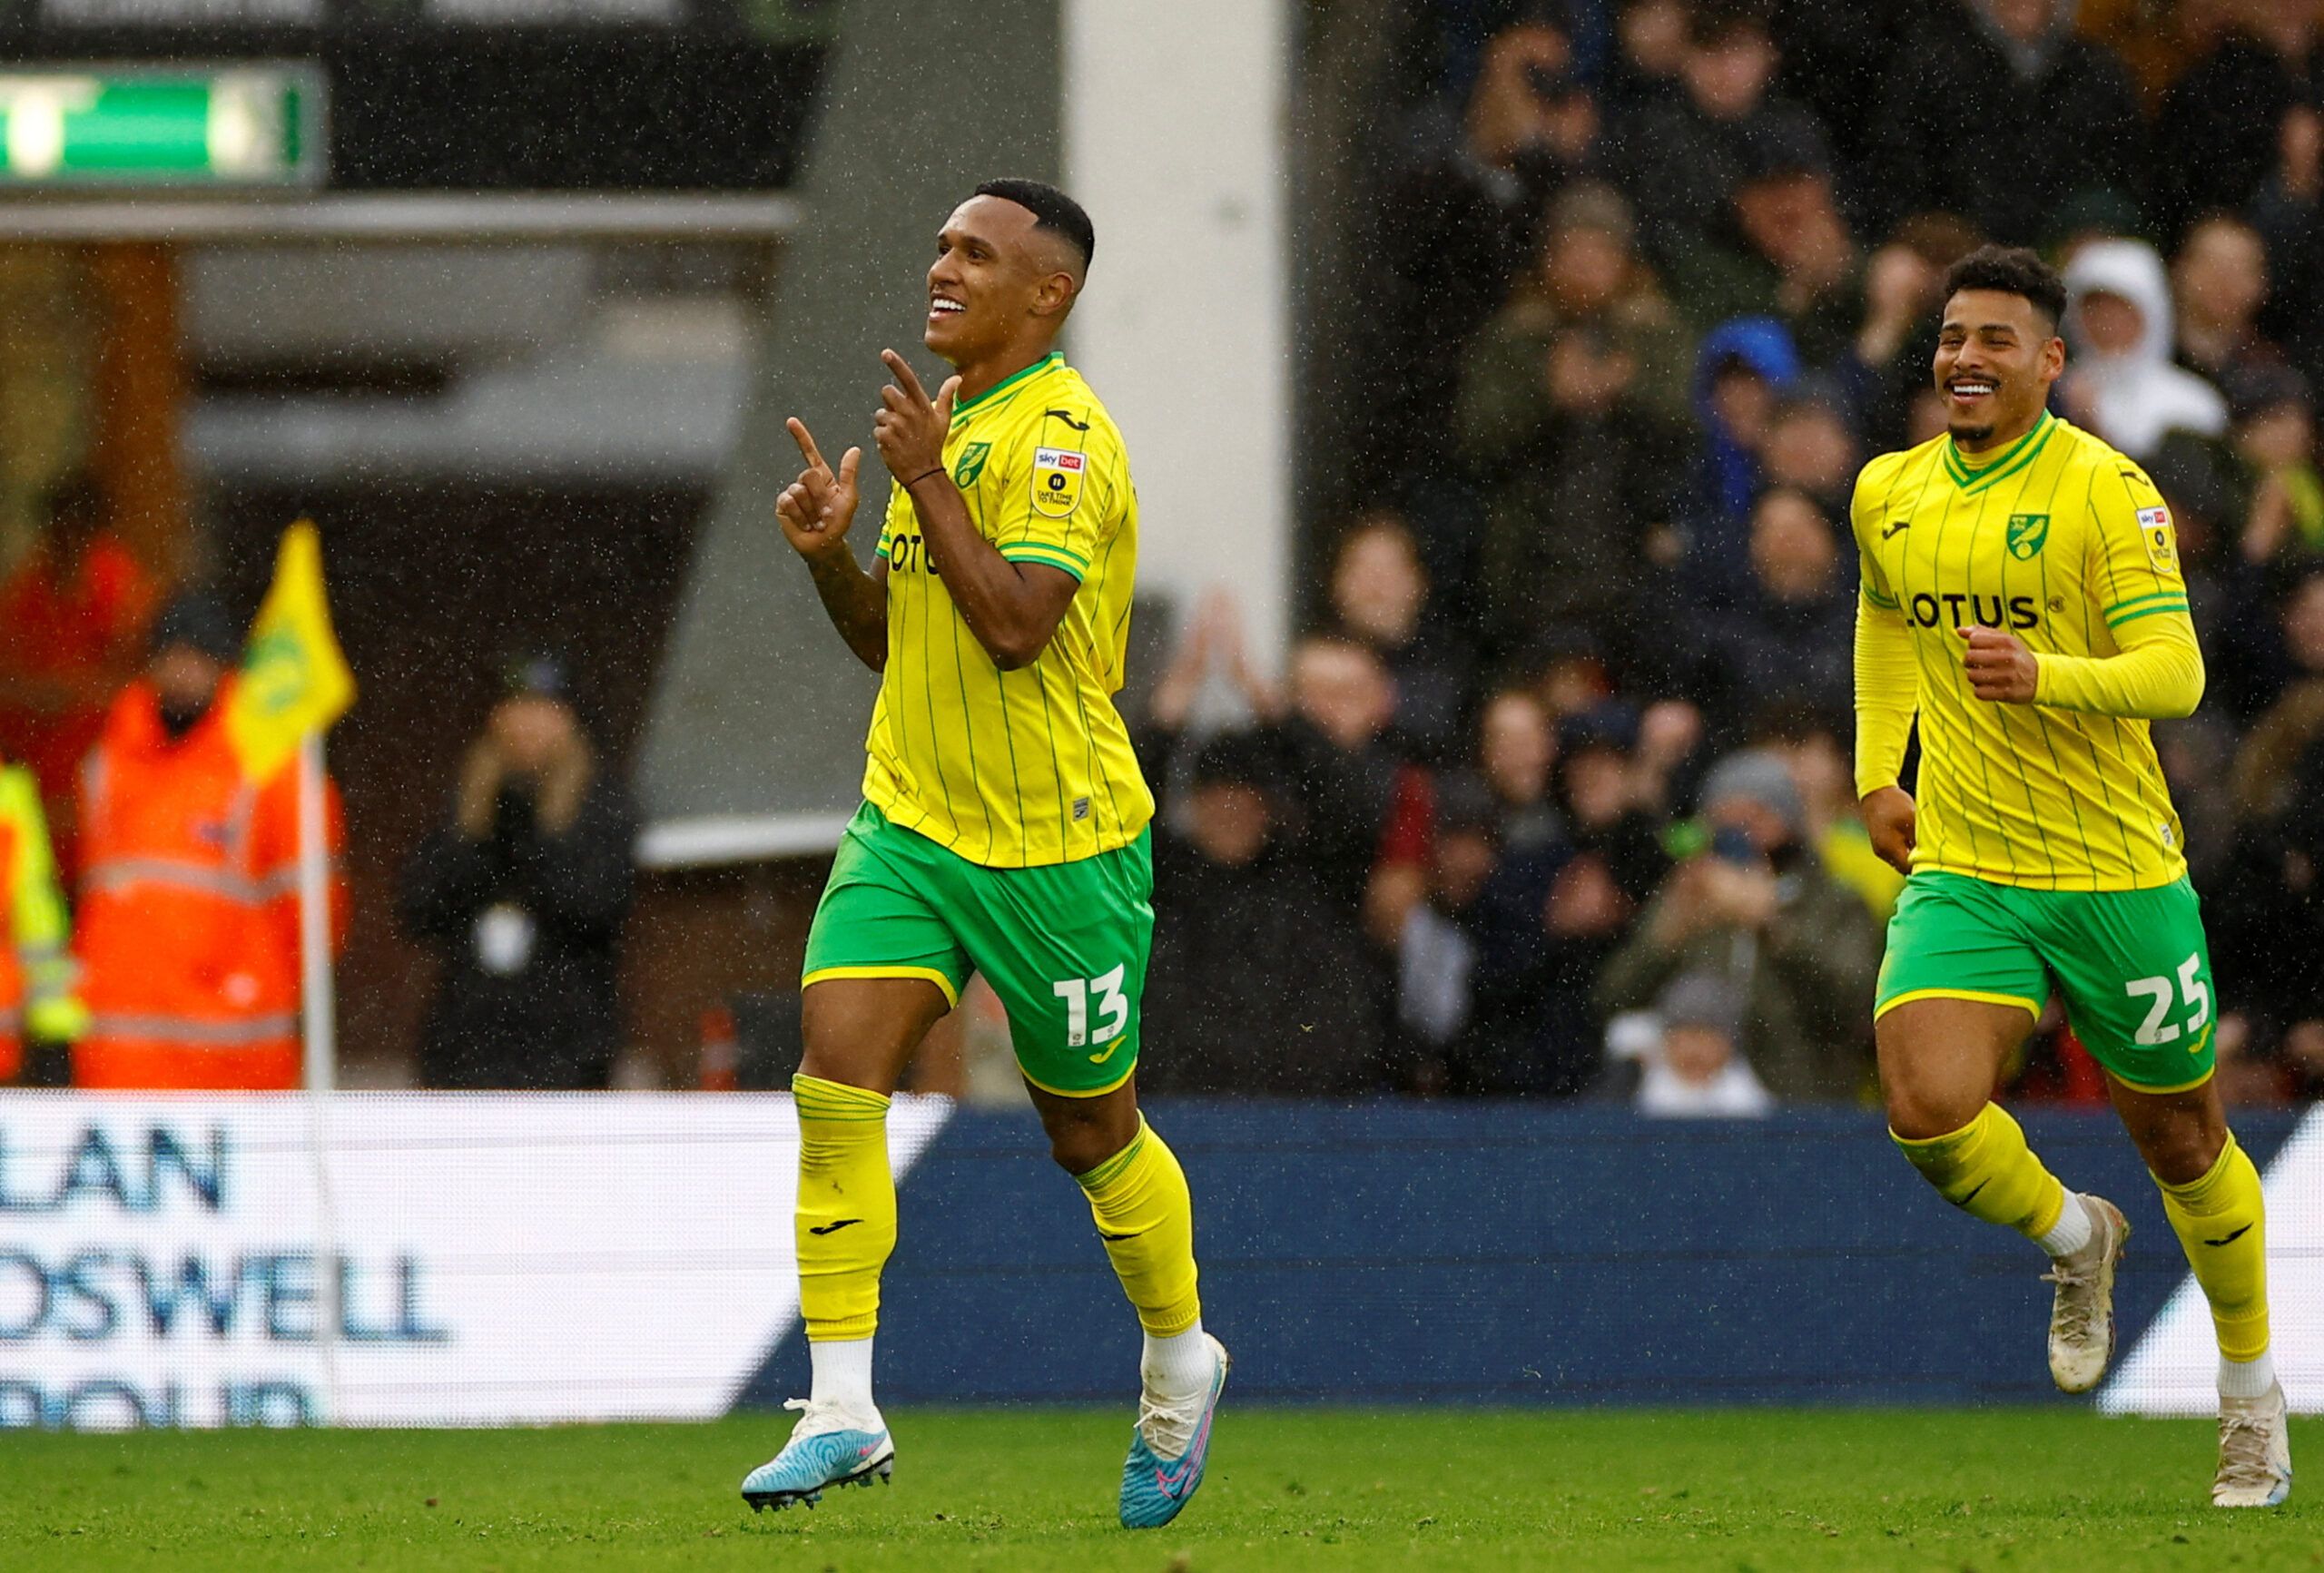 Soccer Football - Championship - Norwich City v Cardiff City - Carrow Road, Norwich, Britain - February 25, 2023  Norwich City's Marquinhos celebrates after scoring their second goal  Action Images/John Sibley  EDITORIAL USE ONLY. No use with unauthorized audio, video, data, fixture lists, club/league logos or 